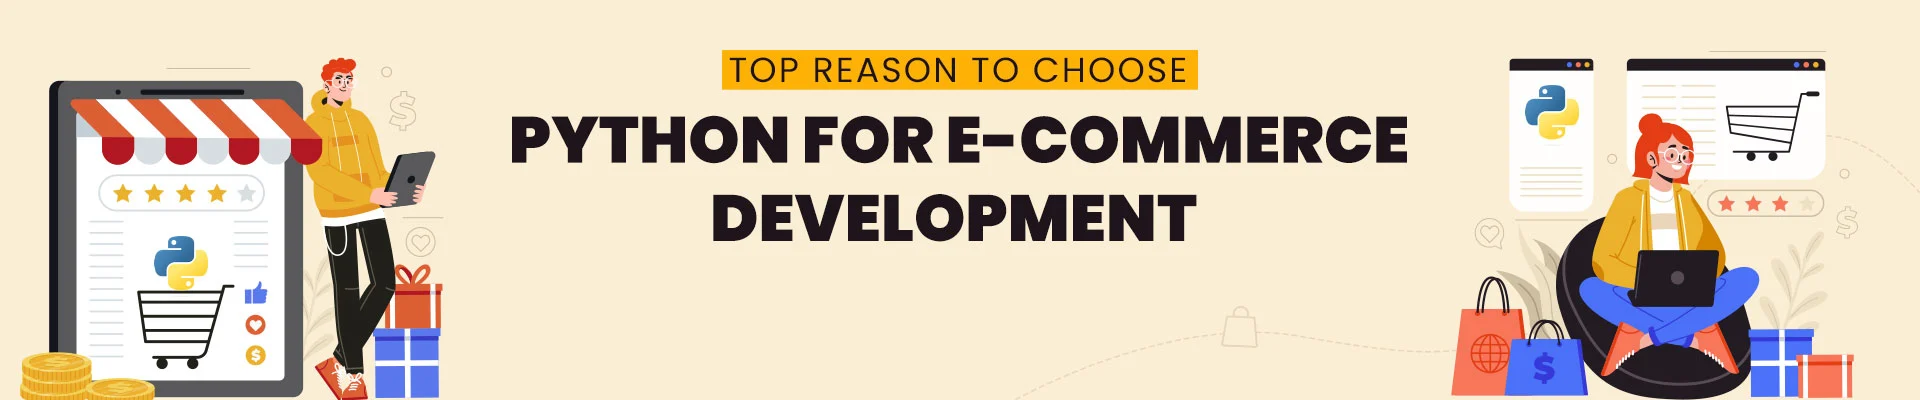 Top Reasons to choose python for eCommerce Development